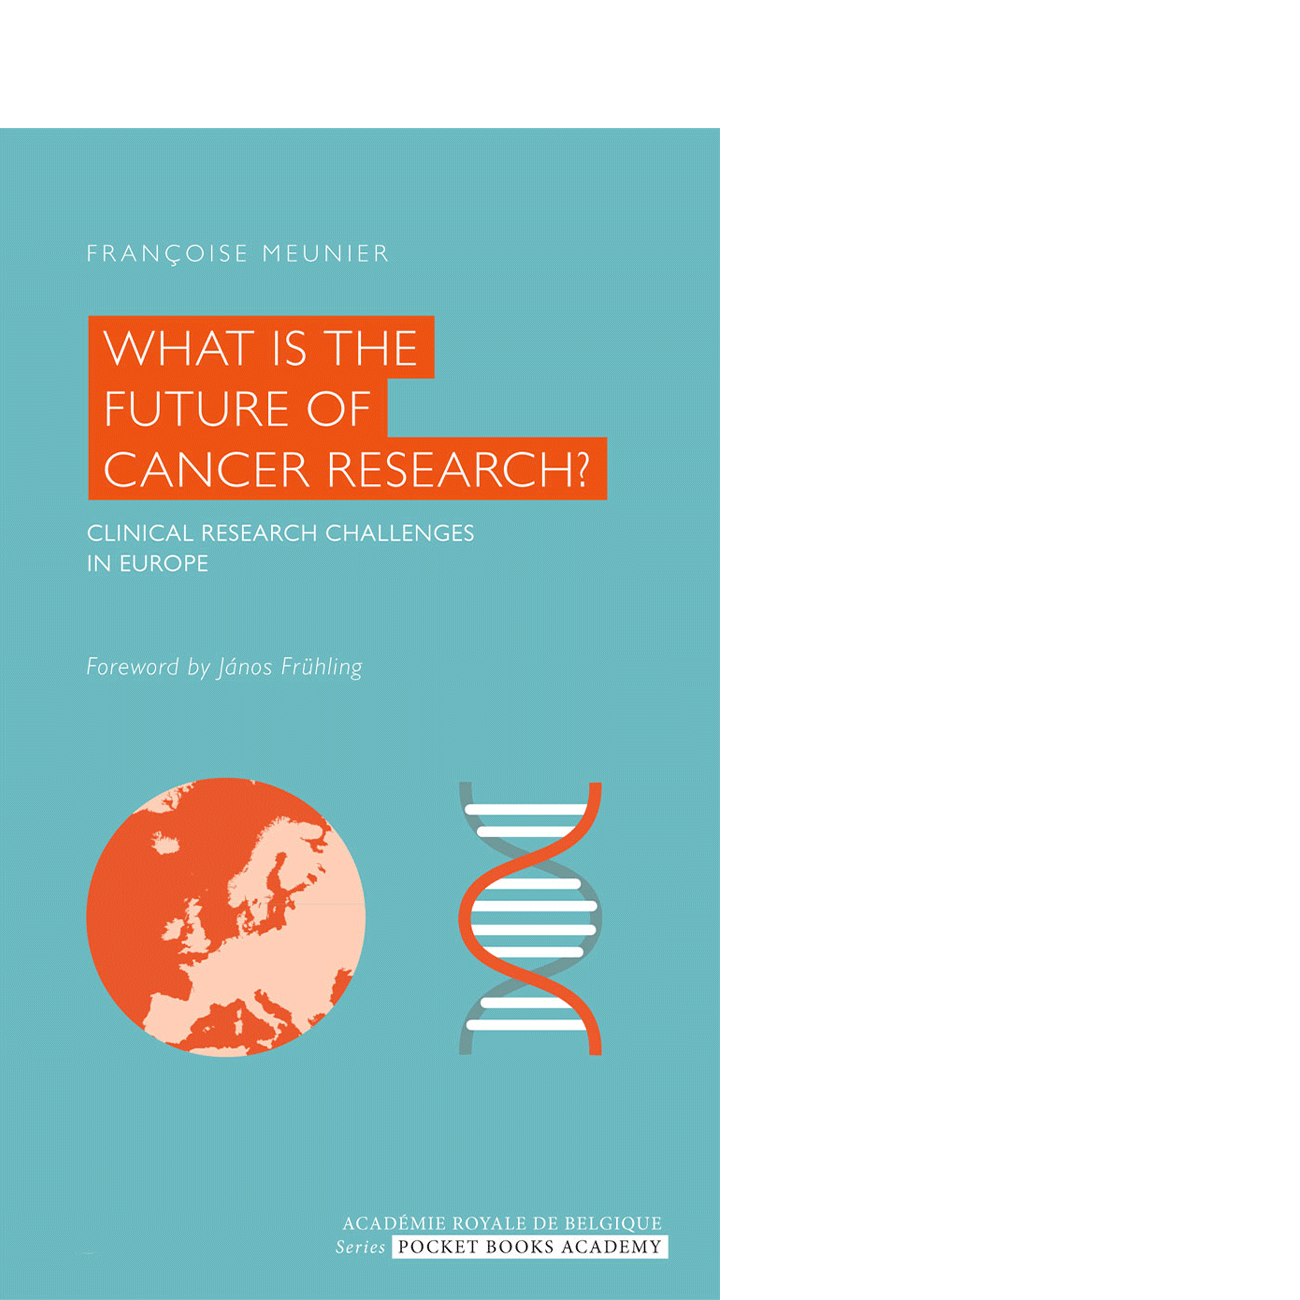 What is the Future of Cancer Research?